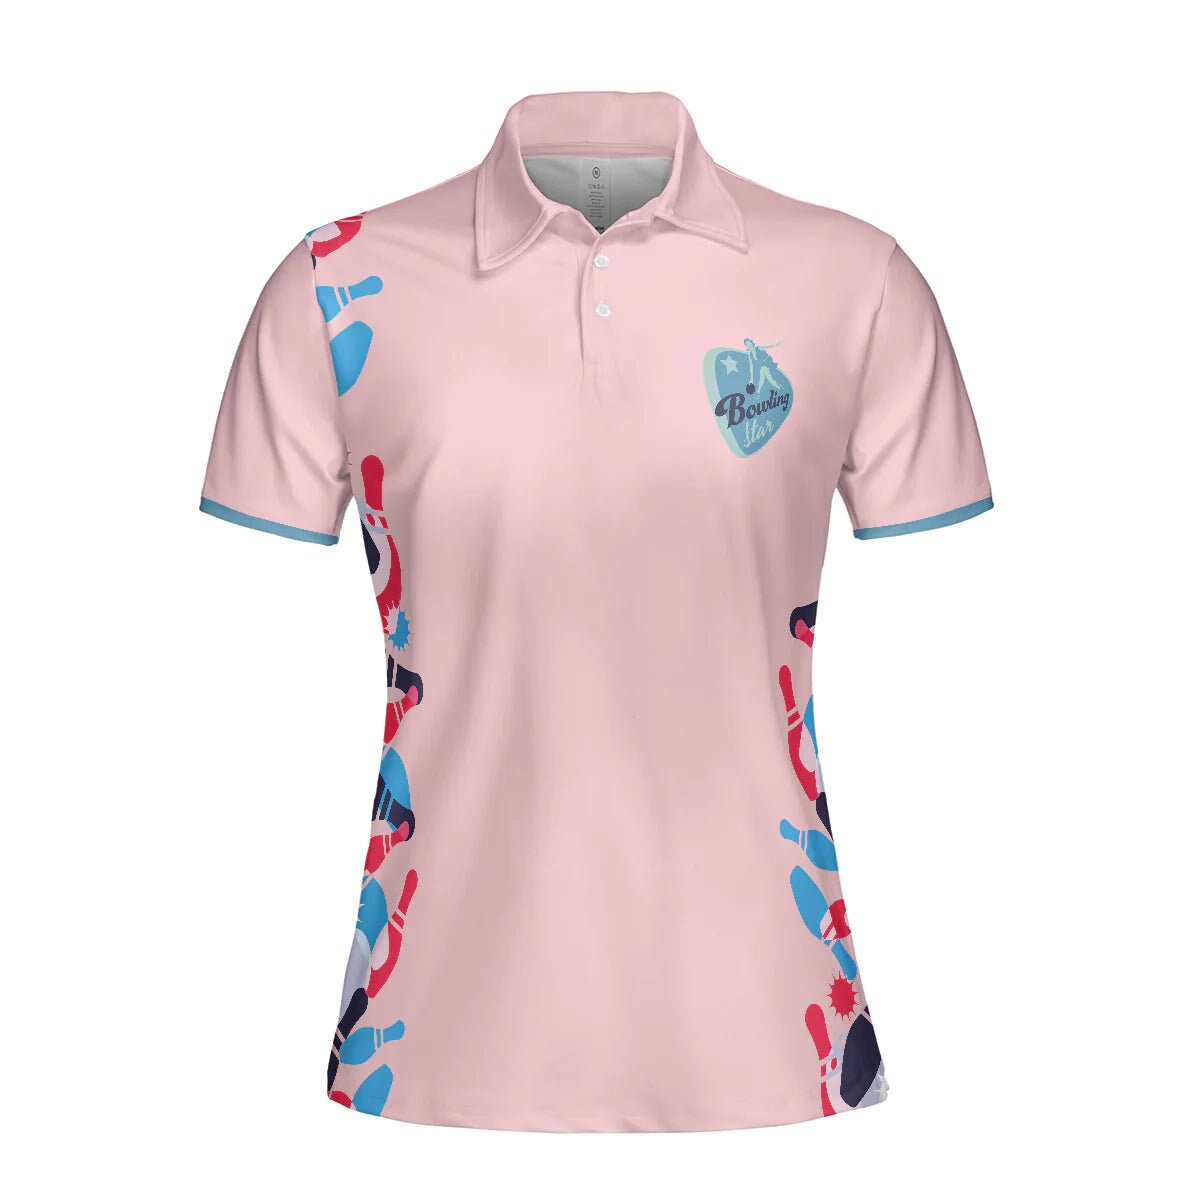 Queen Of The Lanes Bowling Short Sleeve Pink Ladies Bowling Tenpin ...